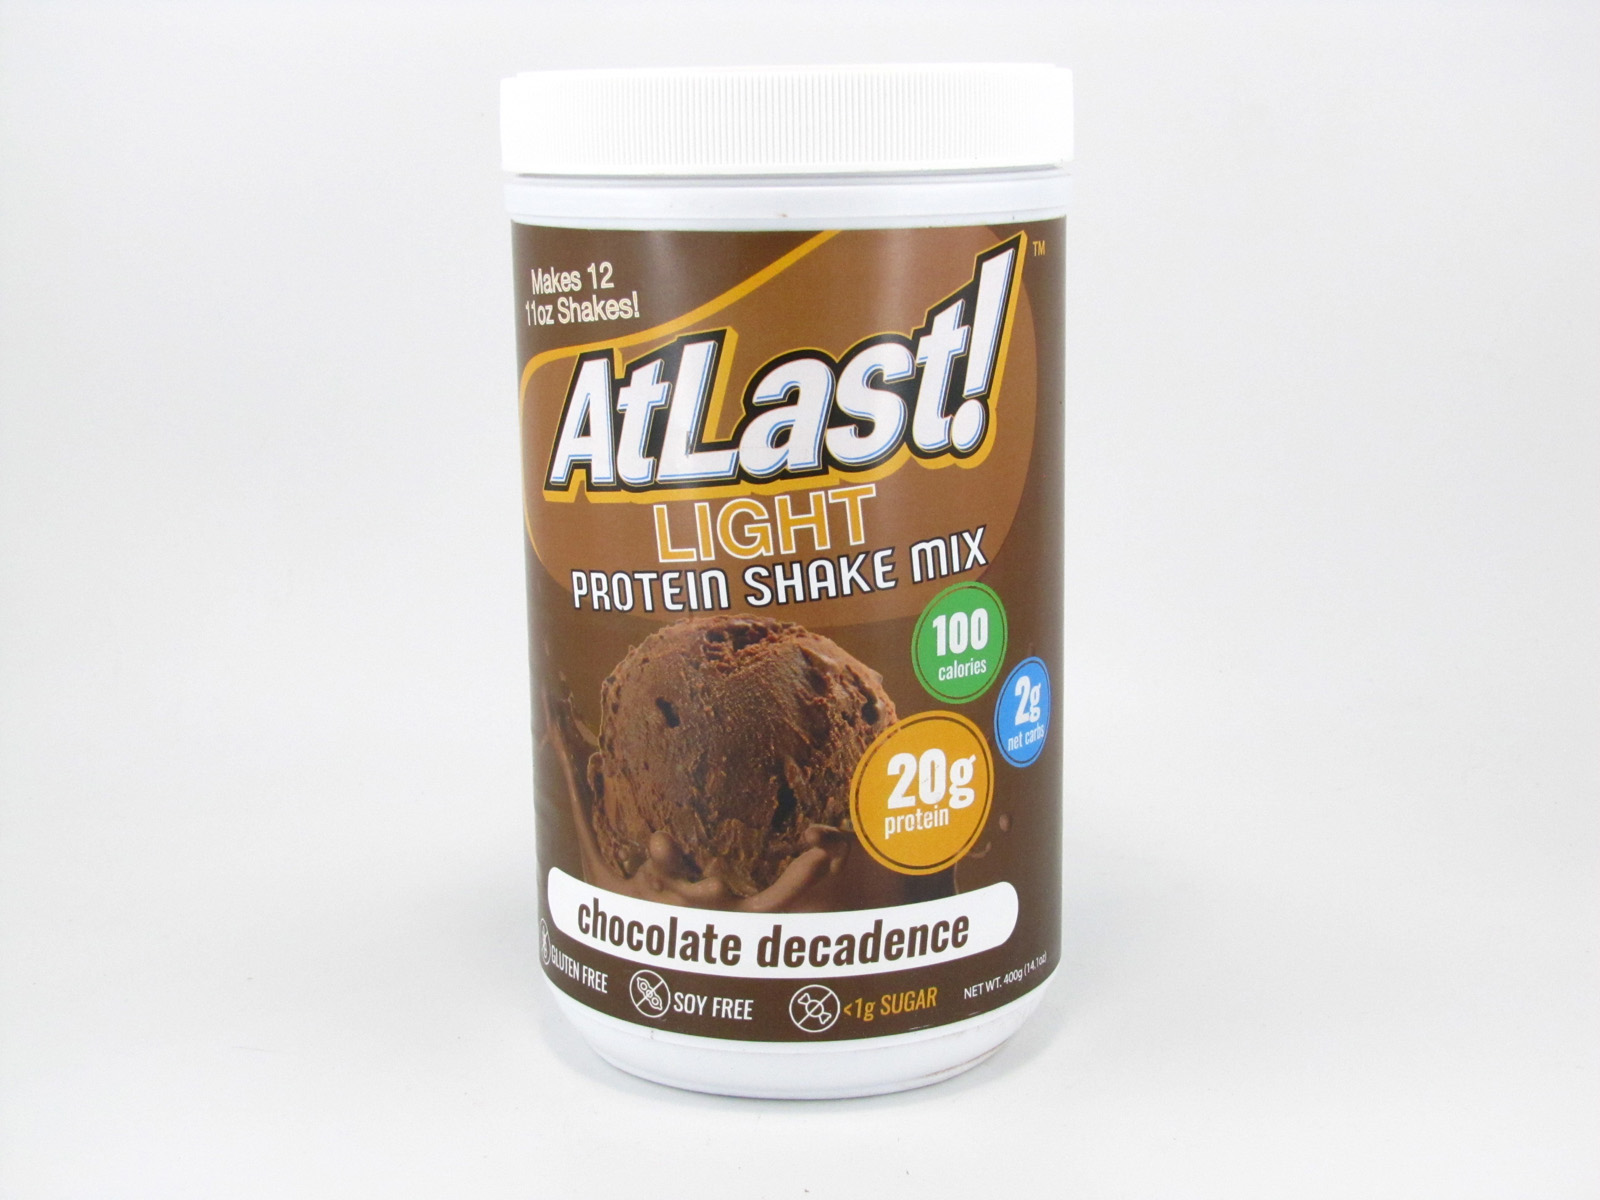 AtLast Light Protein Shake Mix - Chocolate Decadence - front view